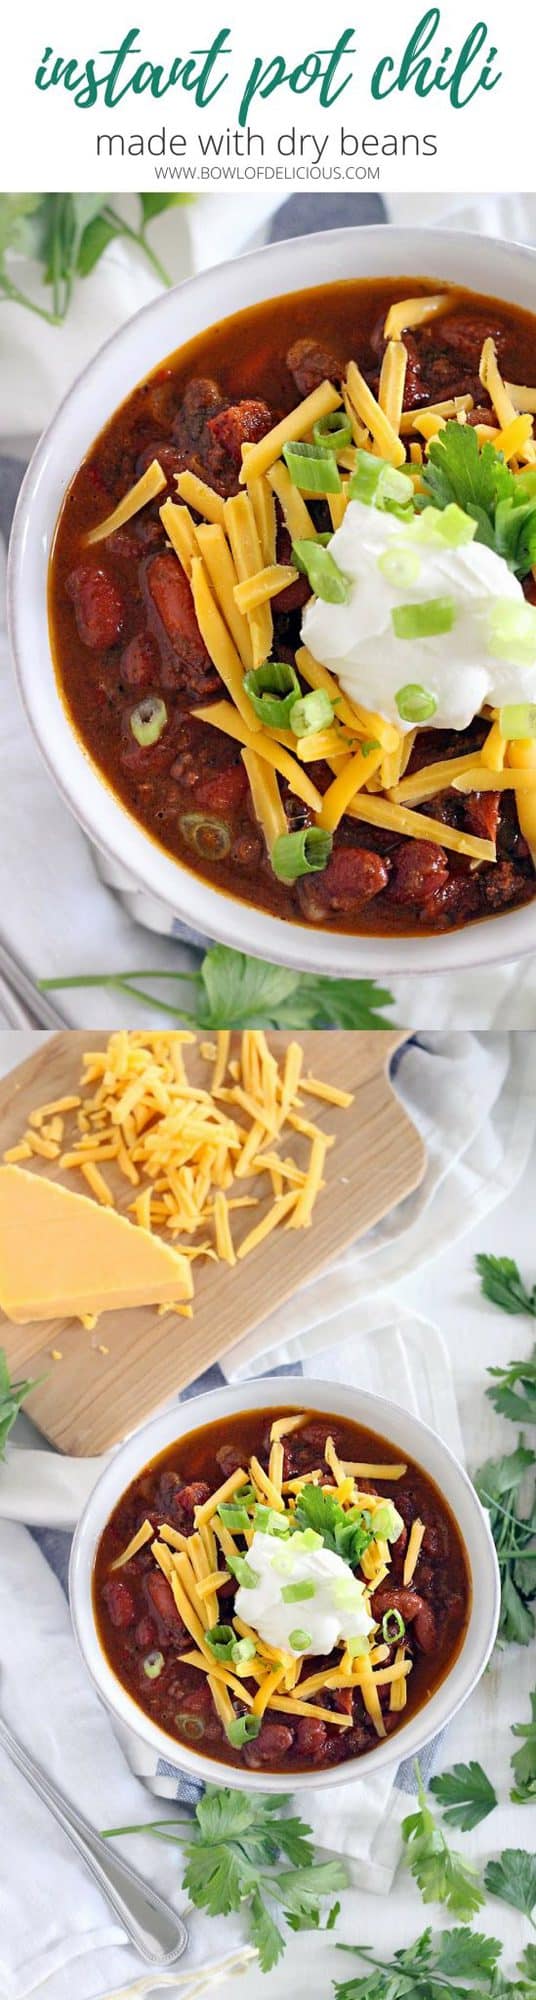 This Instant Pot Chili is made with ground beef and dry kidney beans, and comes together in less than an hour! It's cheap, healthy, and DELICIOUS. #instantpot #crockpot